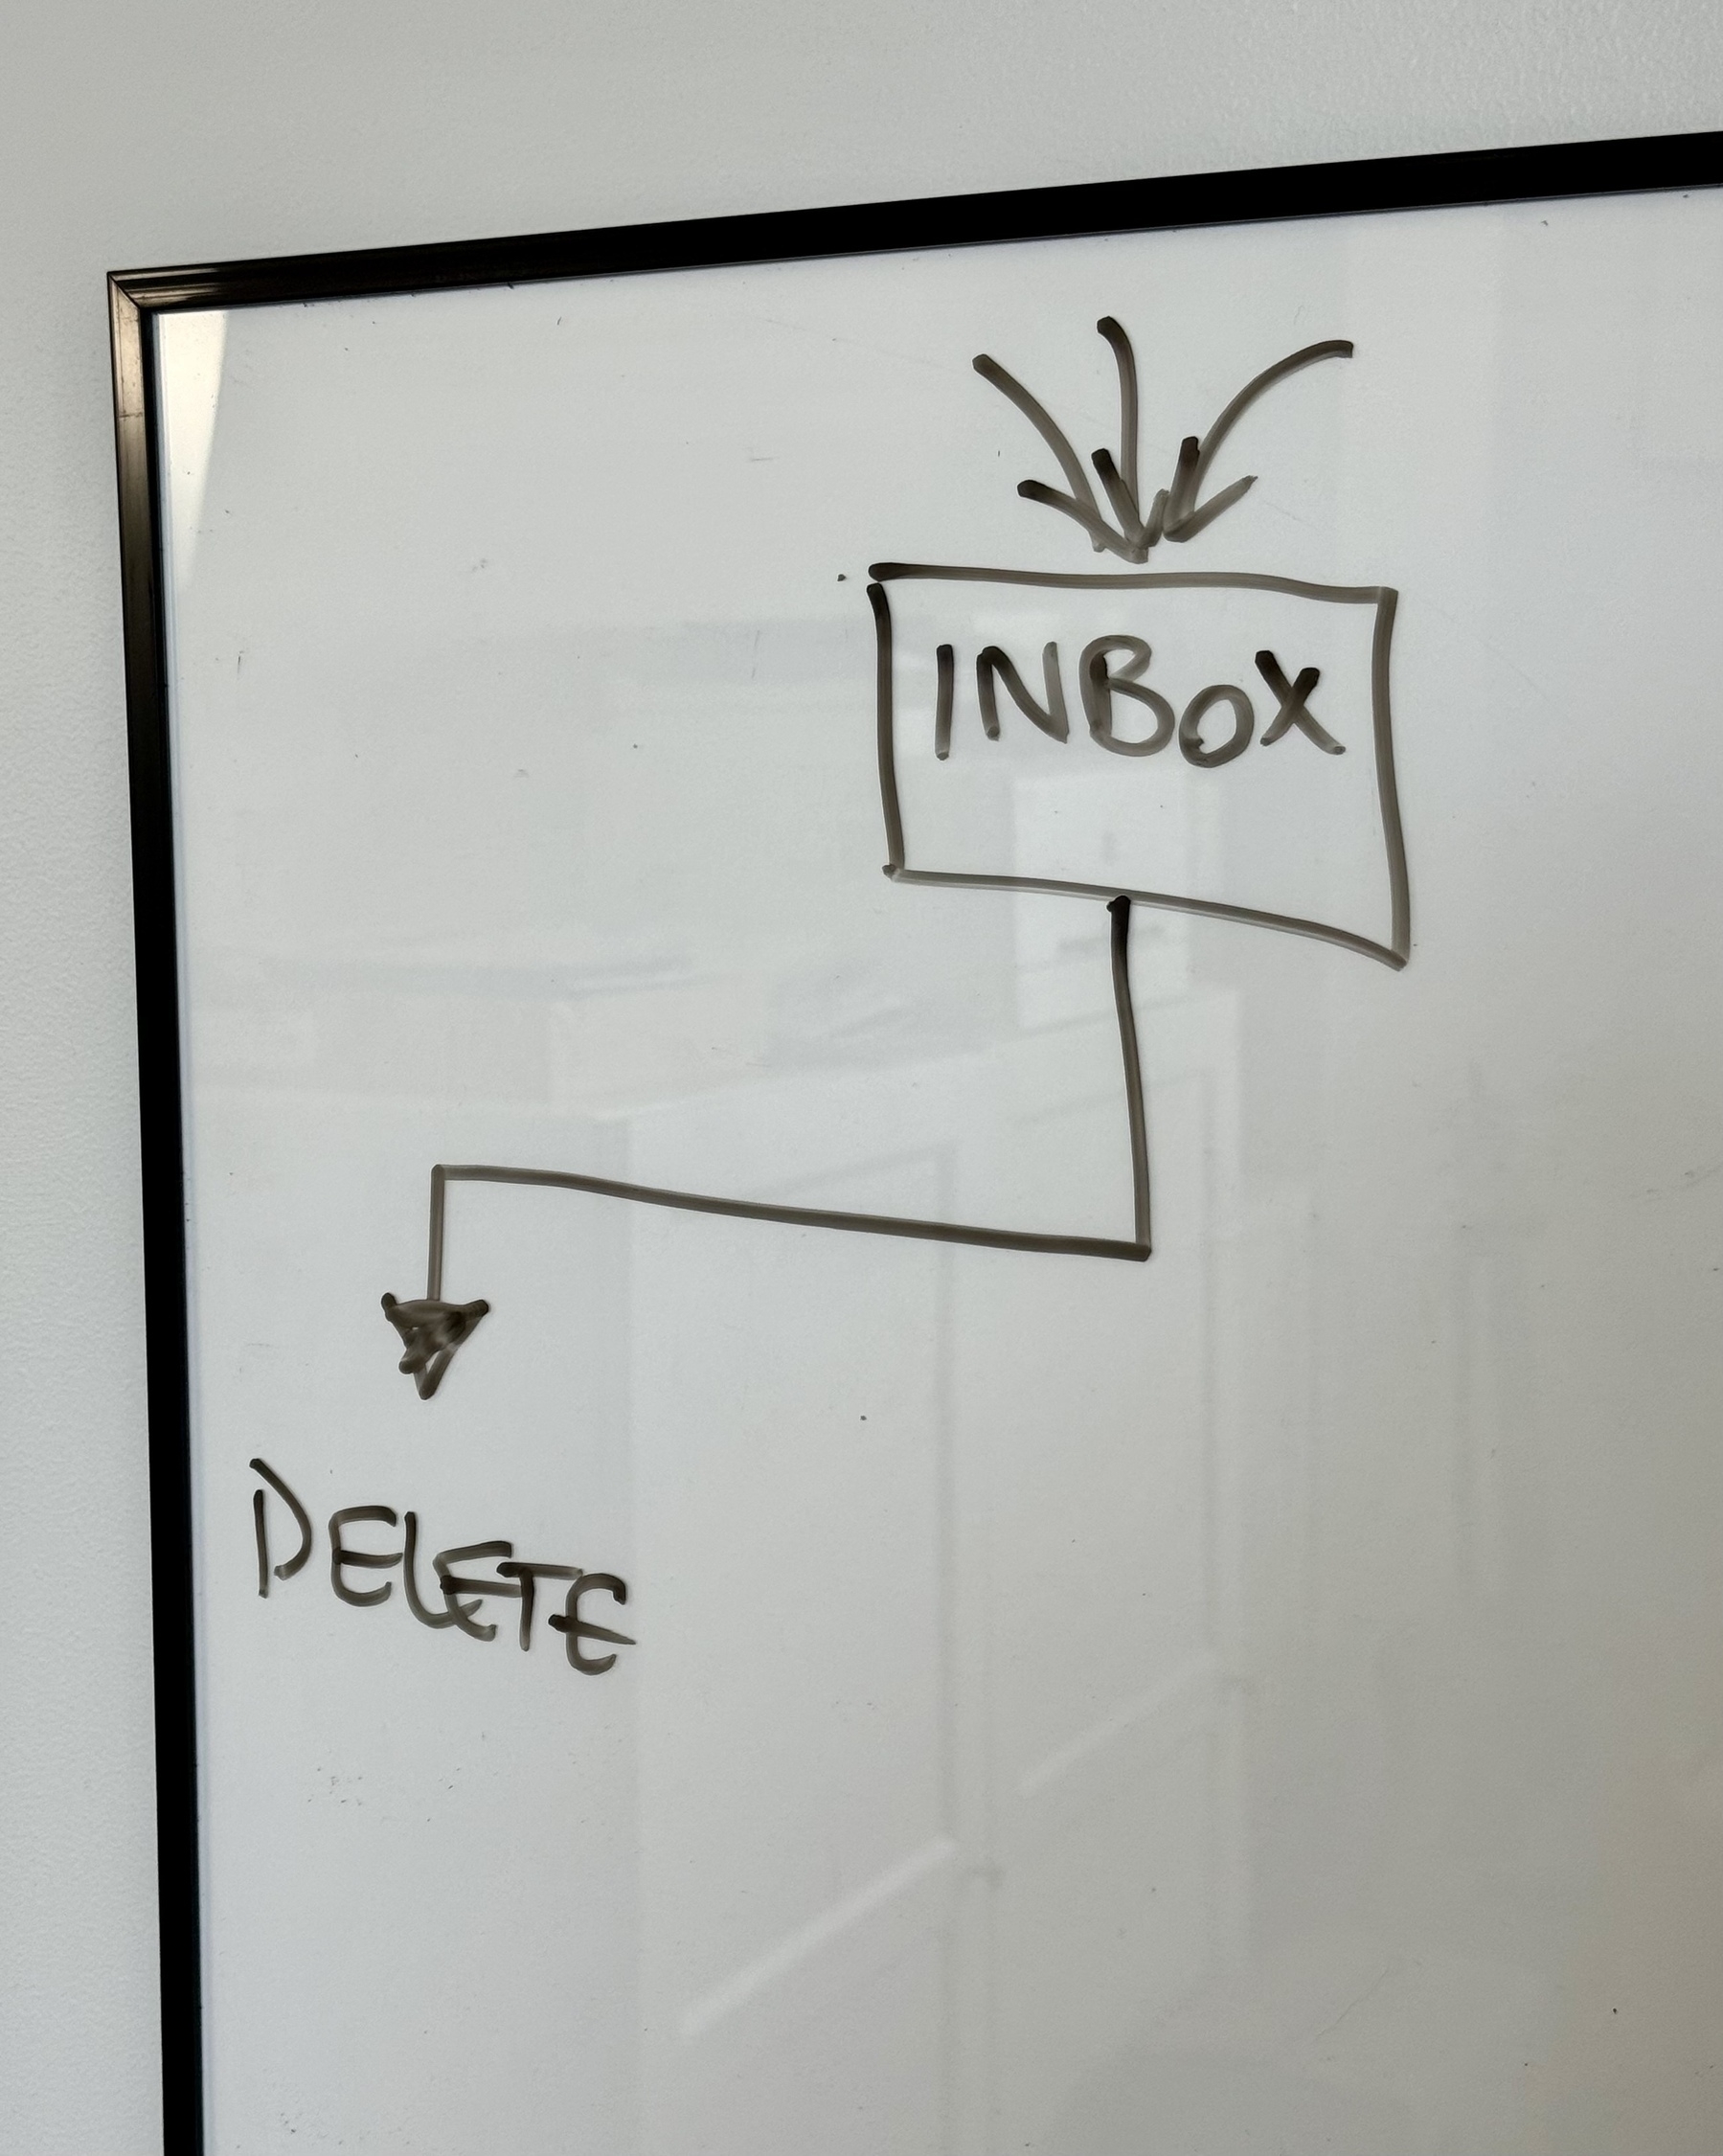 A whiteboard shows a flowchart in which several arrows point to the top of a box labeled "inbox" with a single path leading to the only next step, labeled "delete".